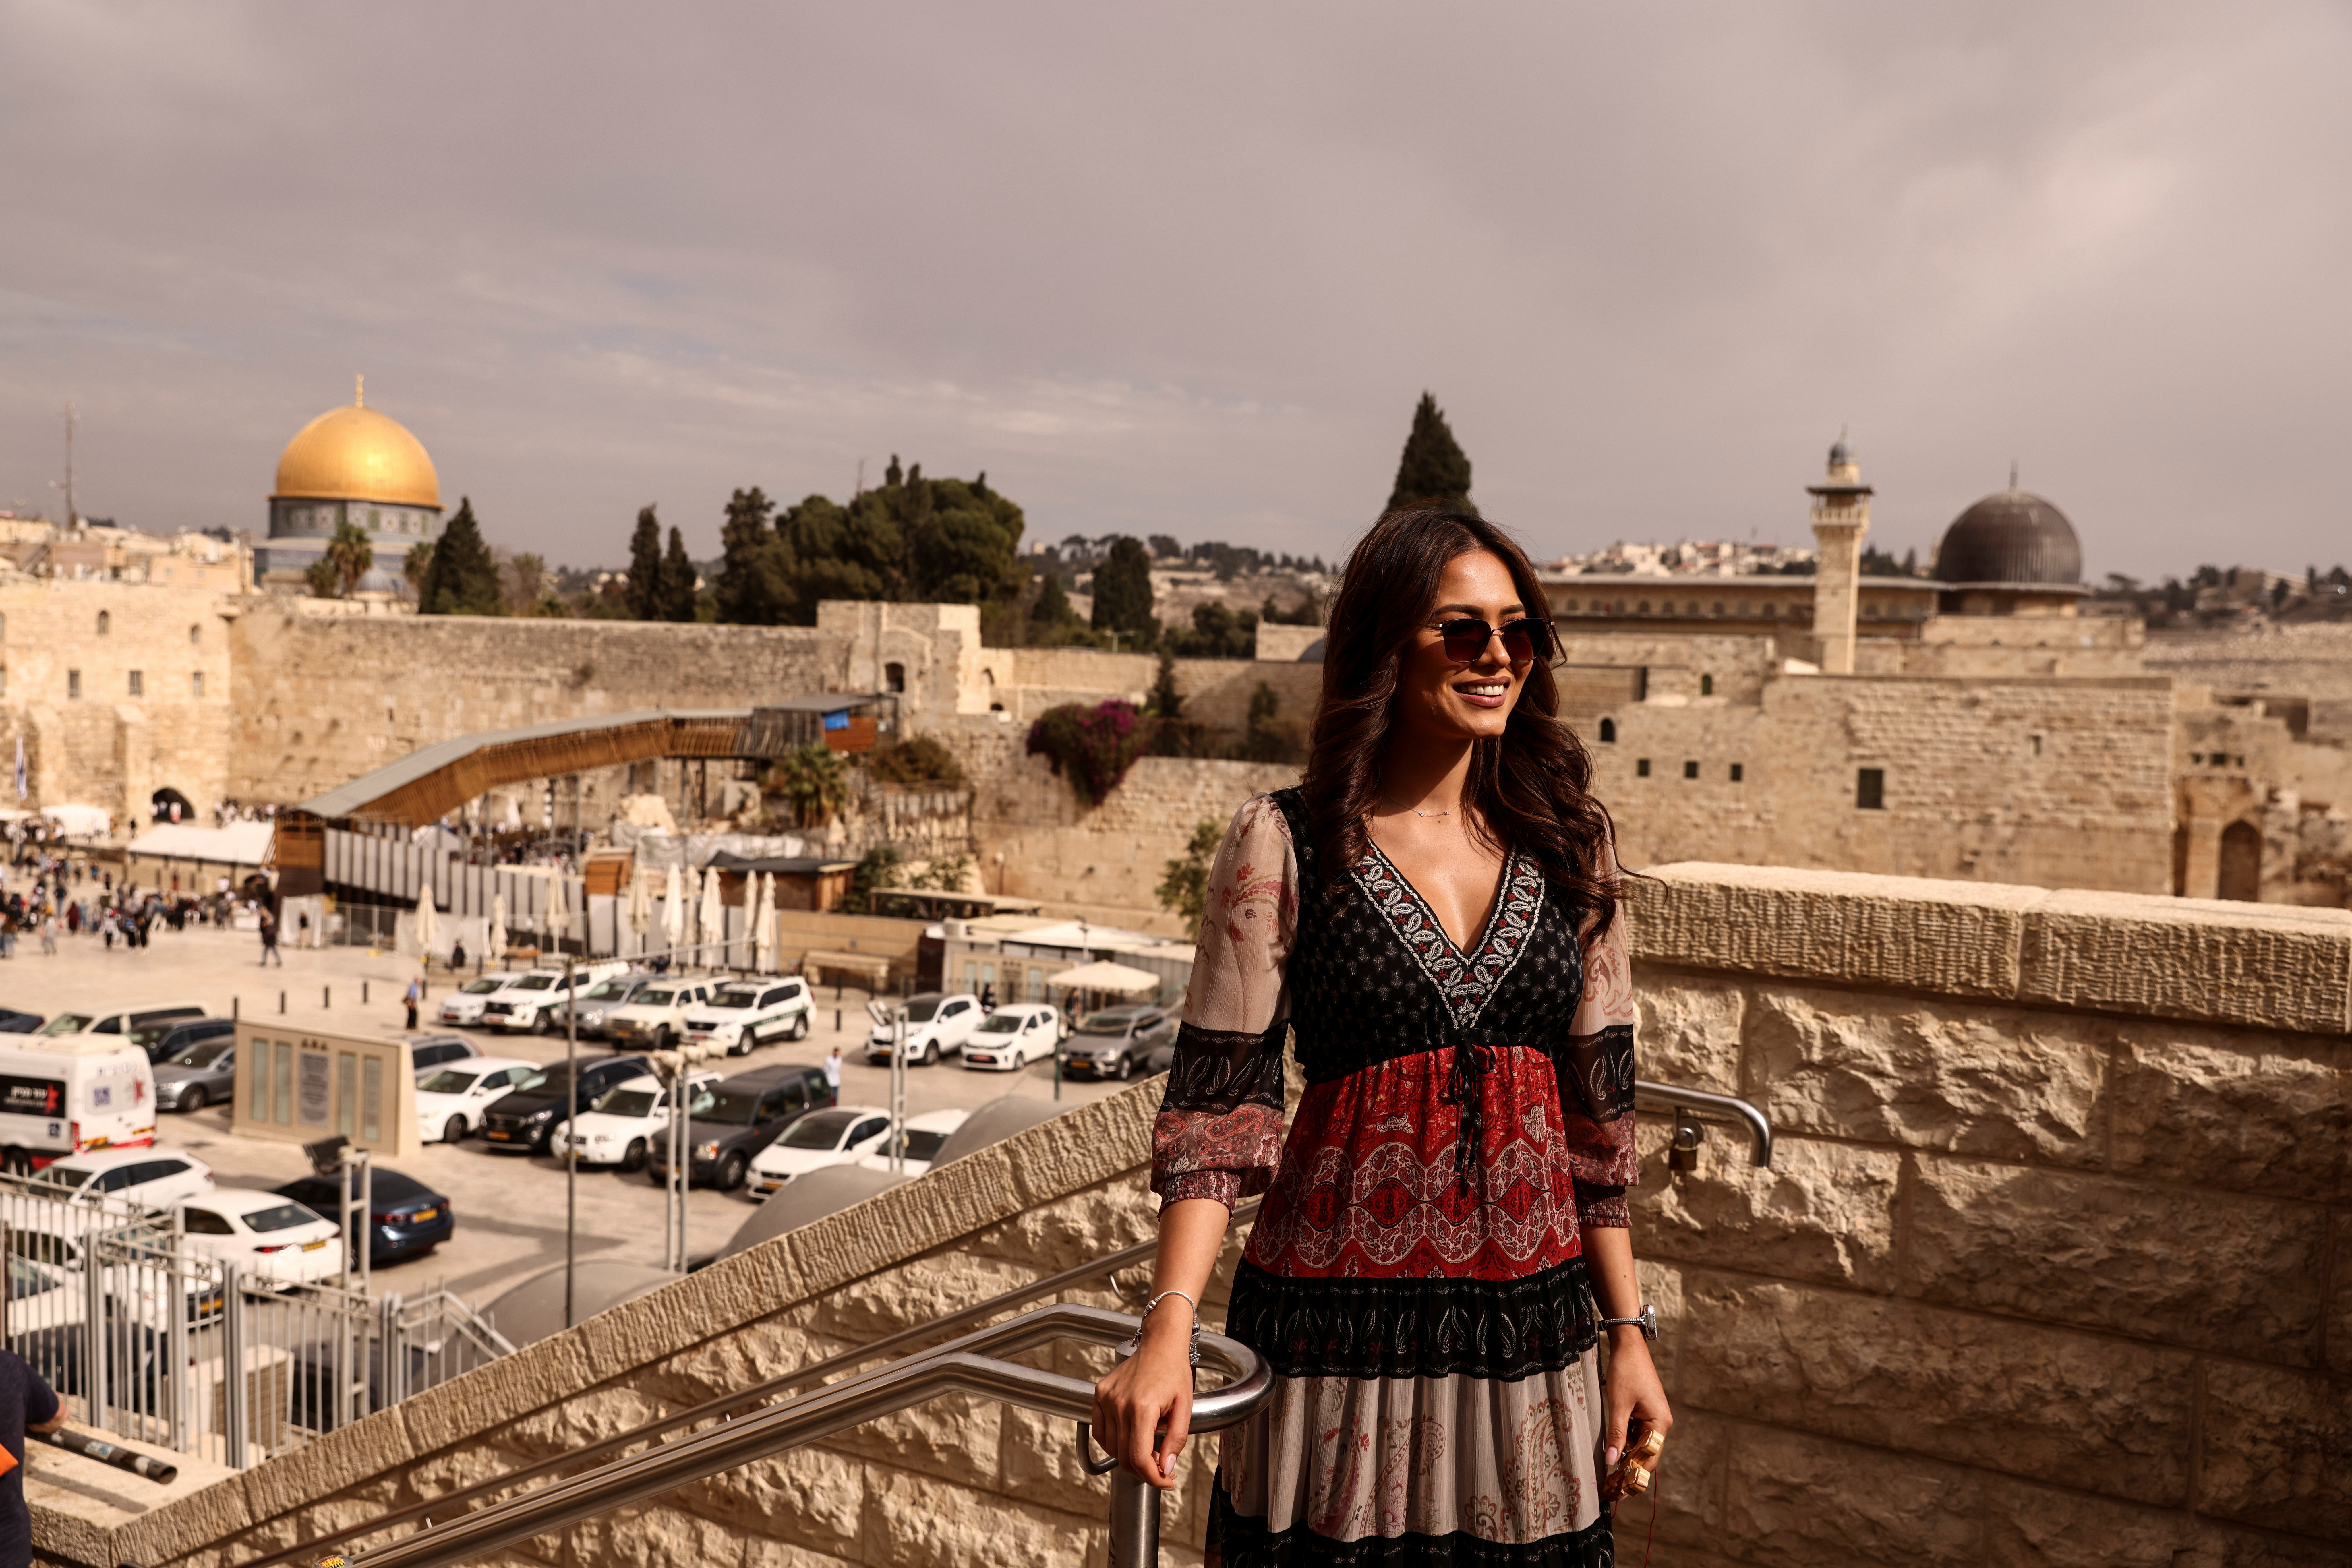 Reigning Miss Universe Andrea Meza of Mexico visits the Holy Sites in Jerusalem's Old City